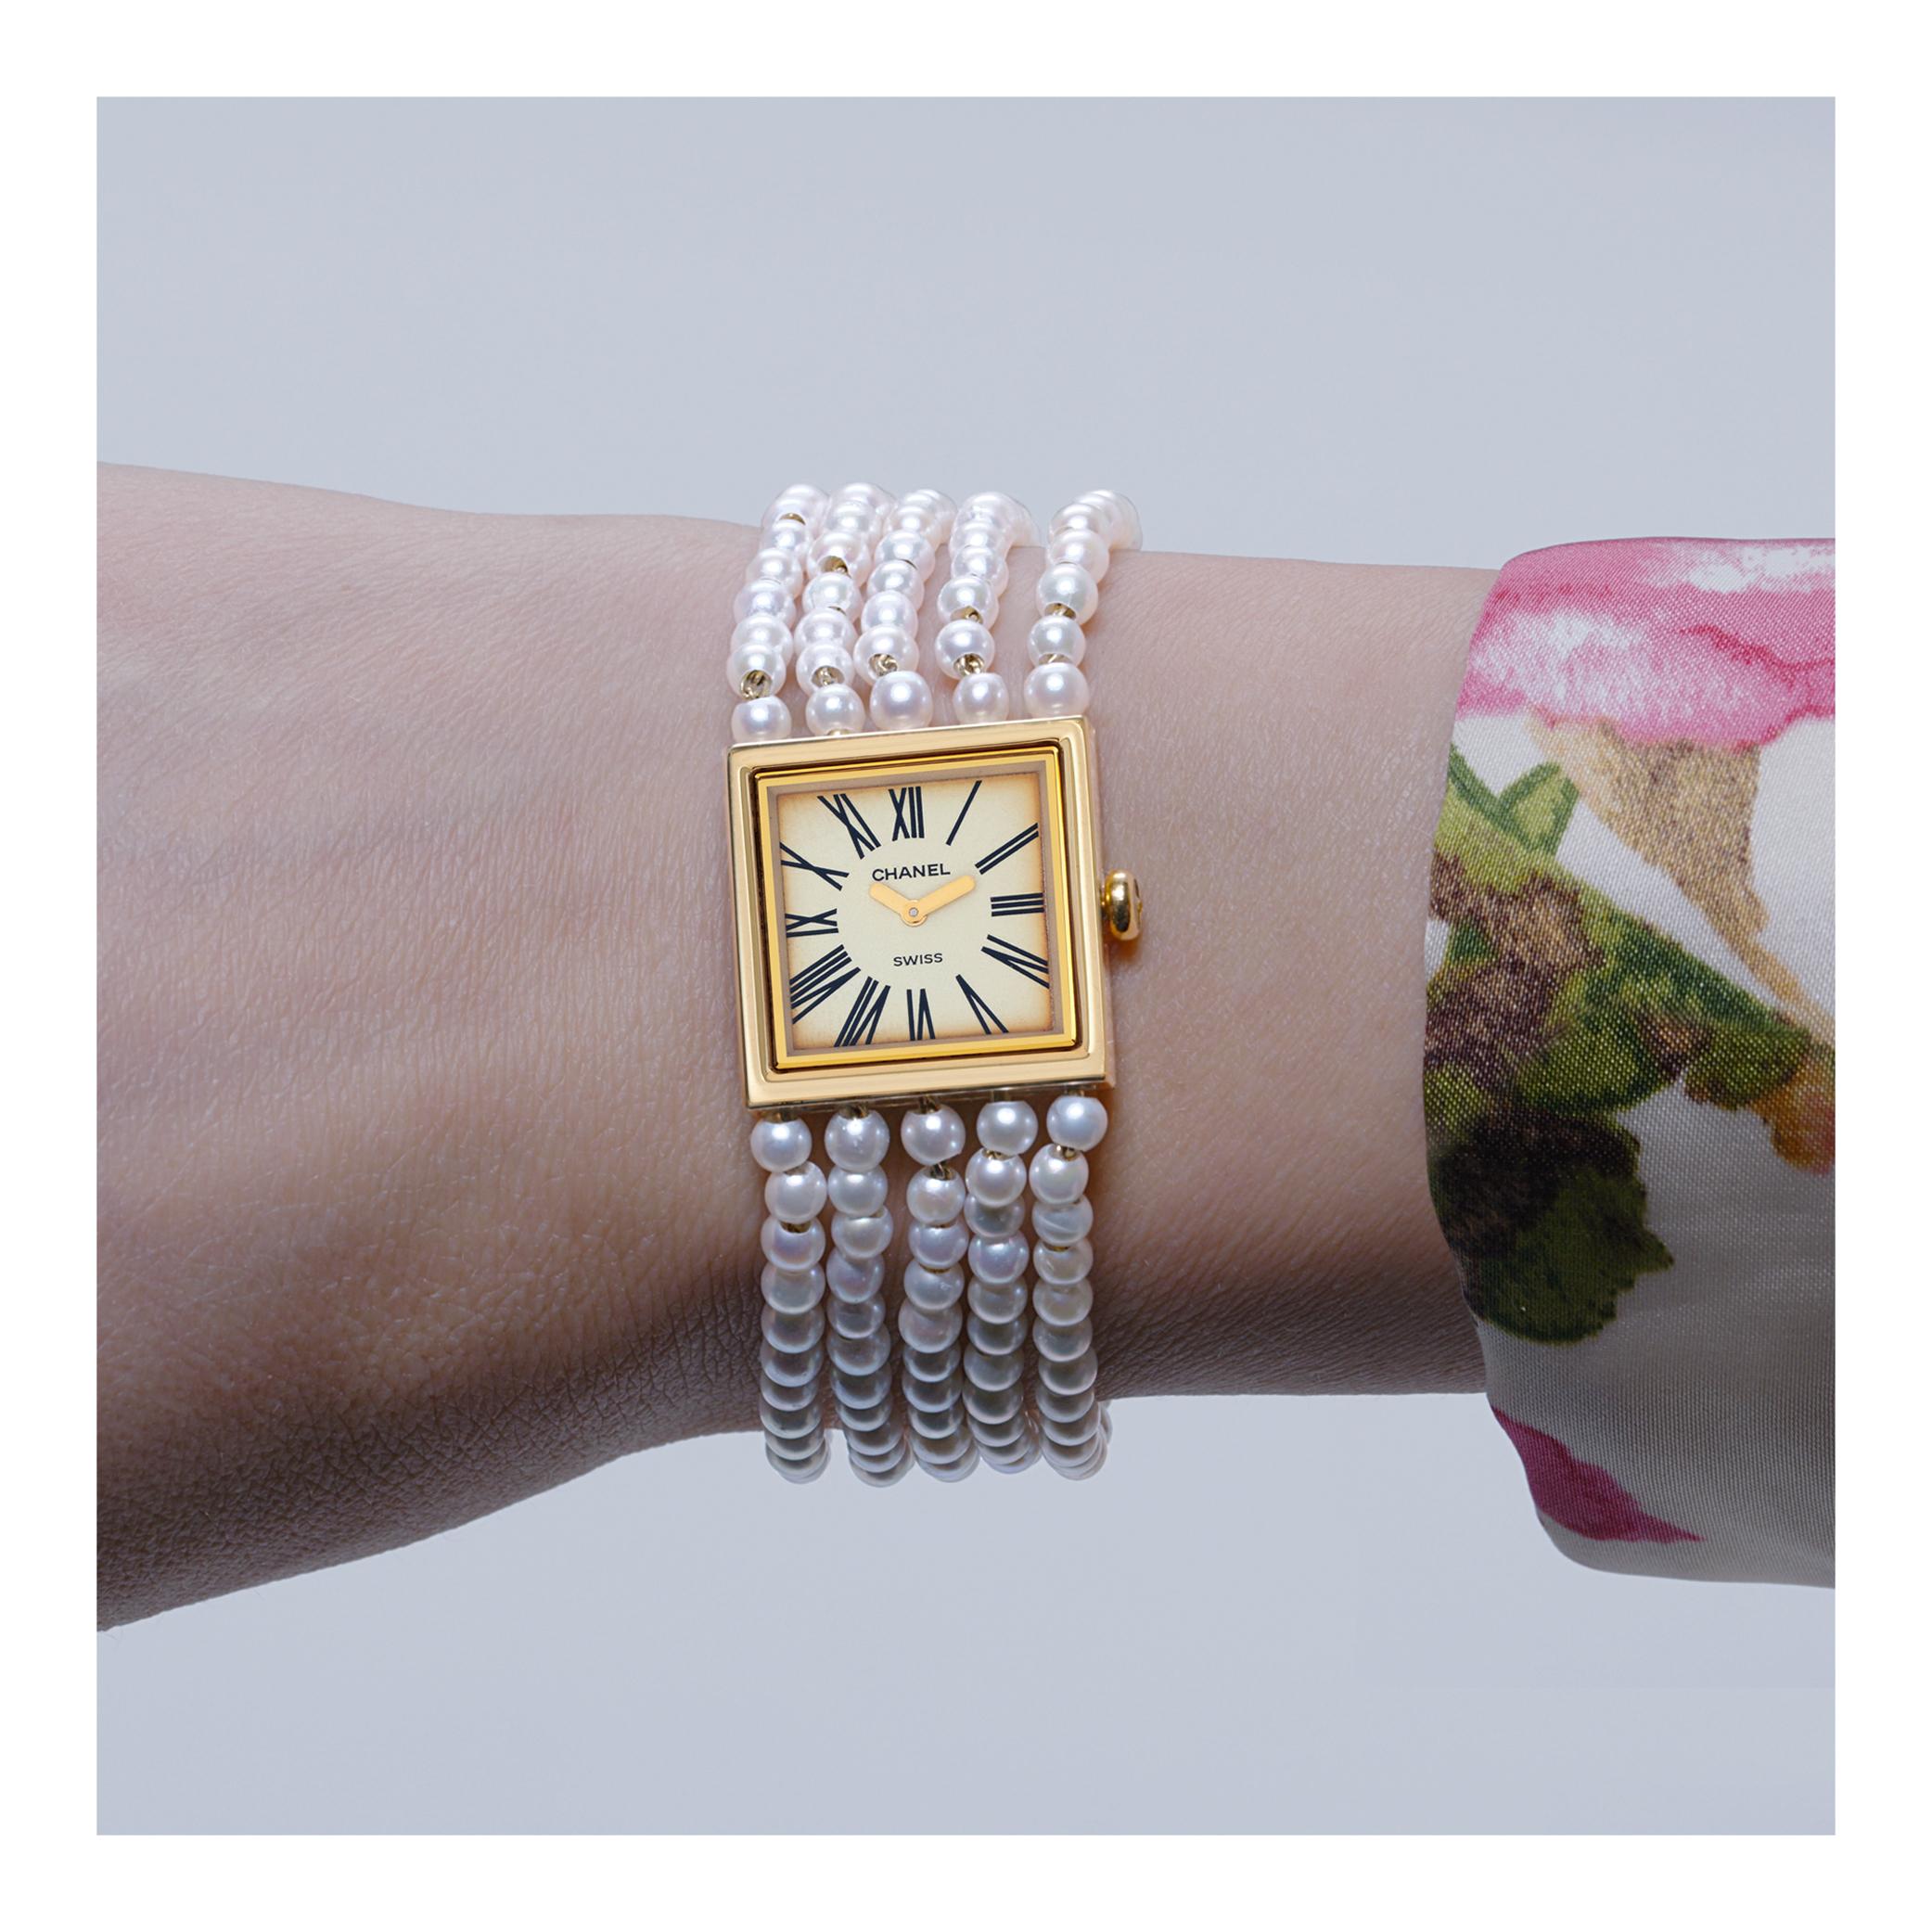 Bead Chanel Mademoiselle h0007 18k yellow gold watch For Sale